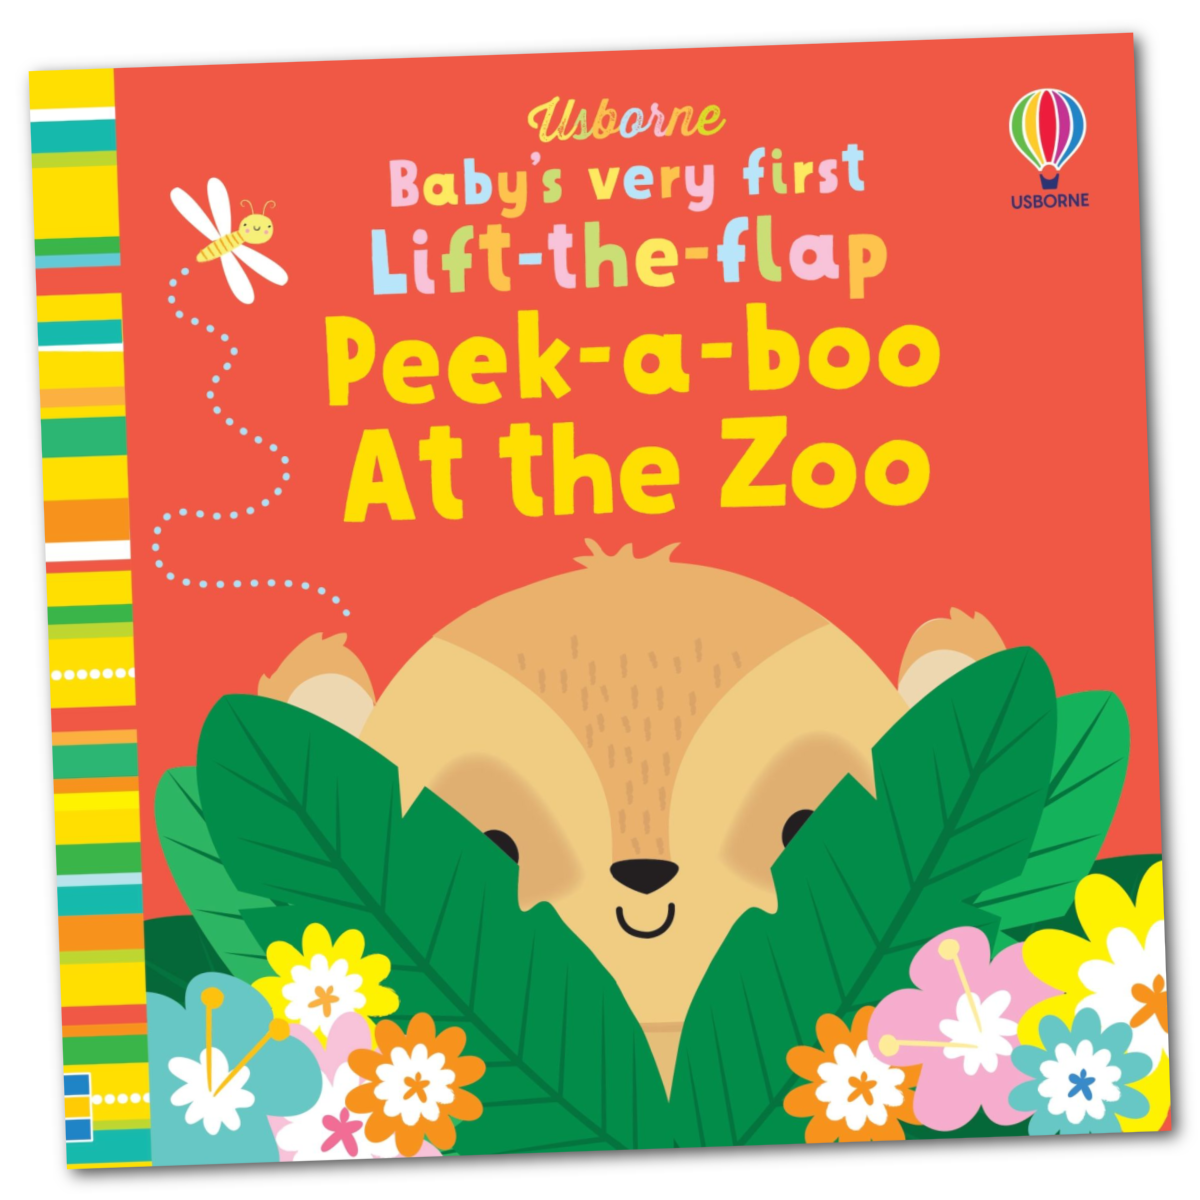 Usborne Books | Peek-a-boo At the Zoo - Baby's Very First Lift-the-flap